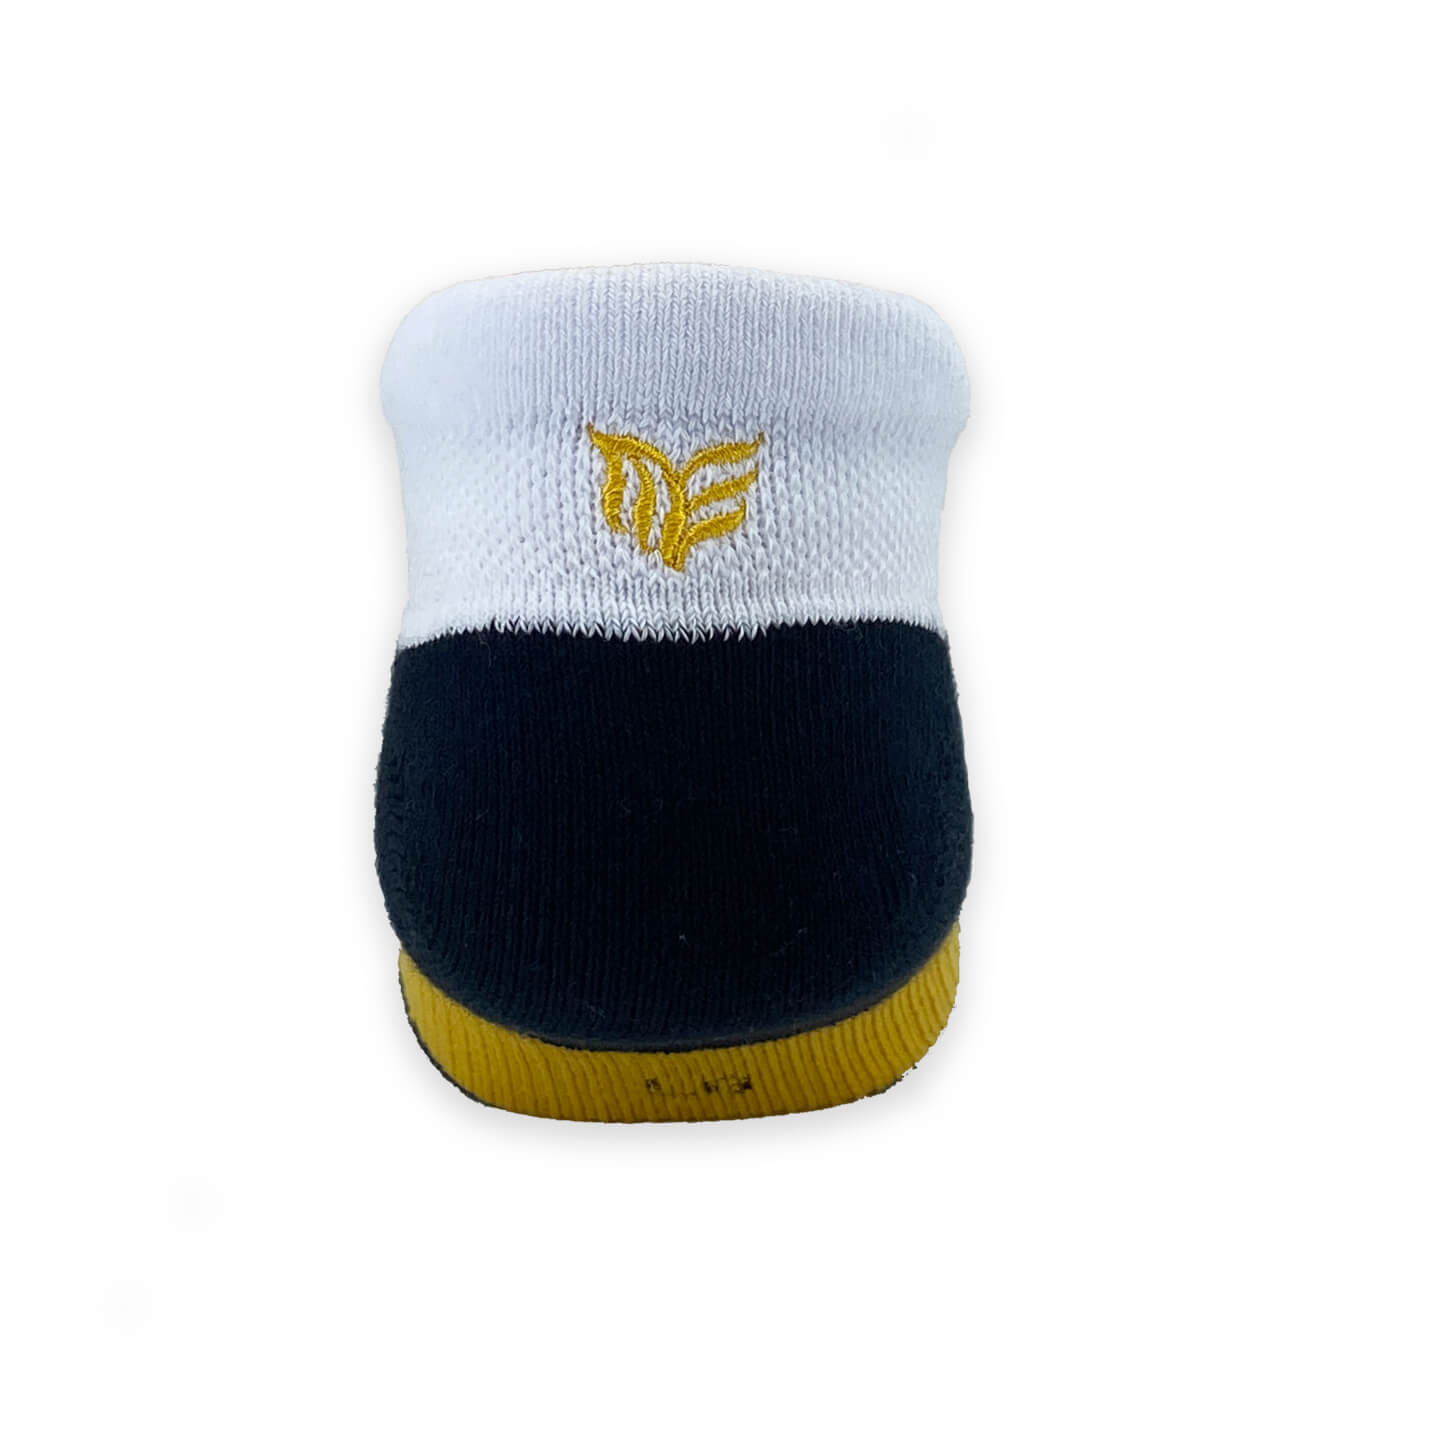 Elevated comfort ankle socks in White with Black bottom and Gold arch band back view